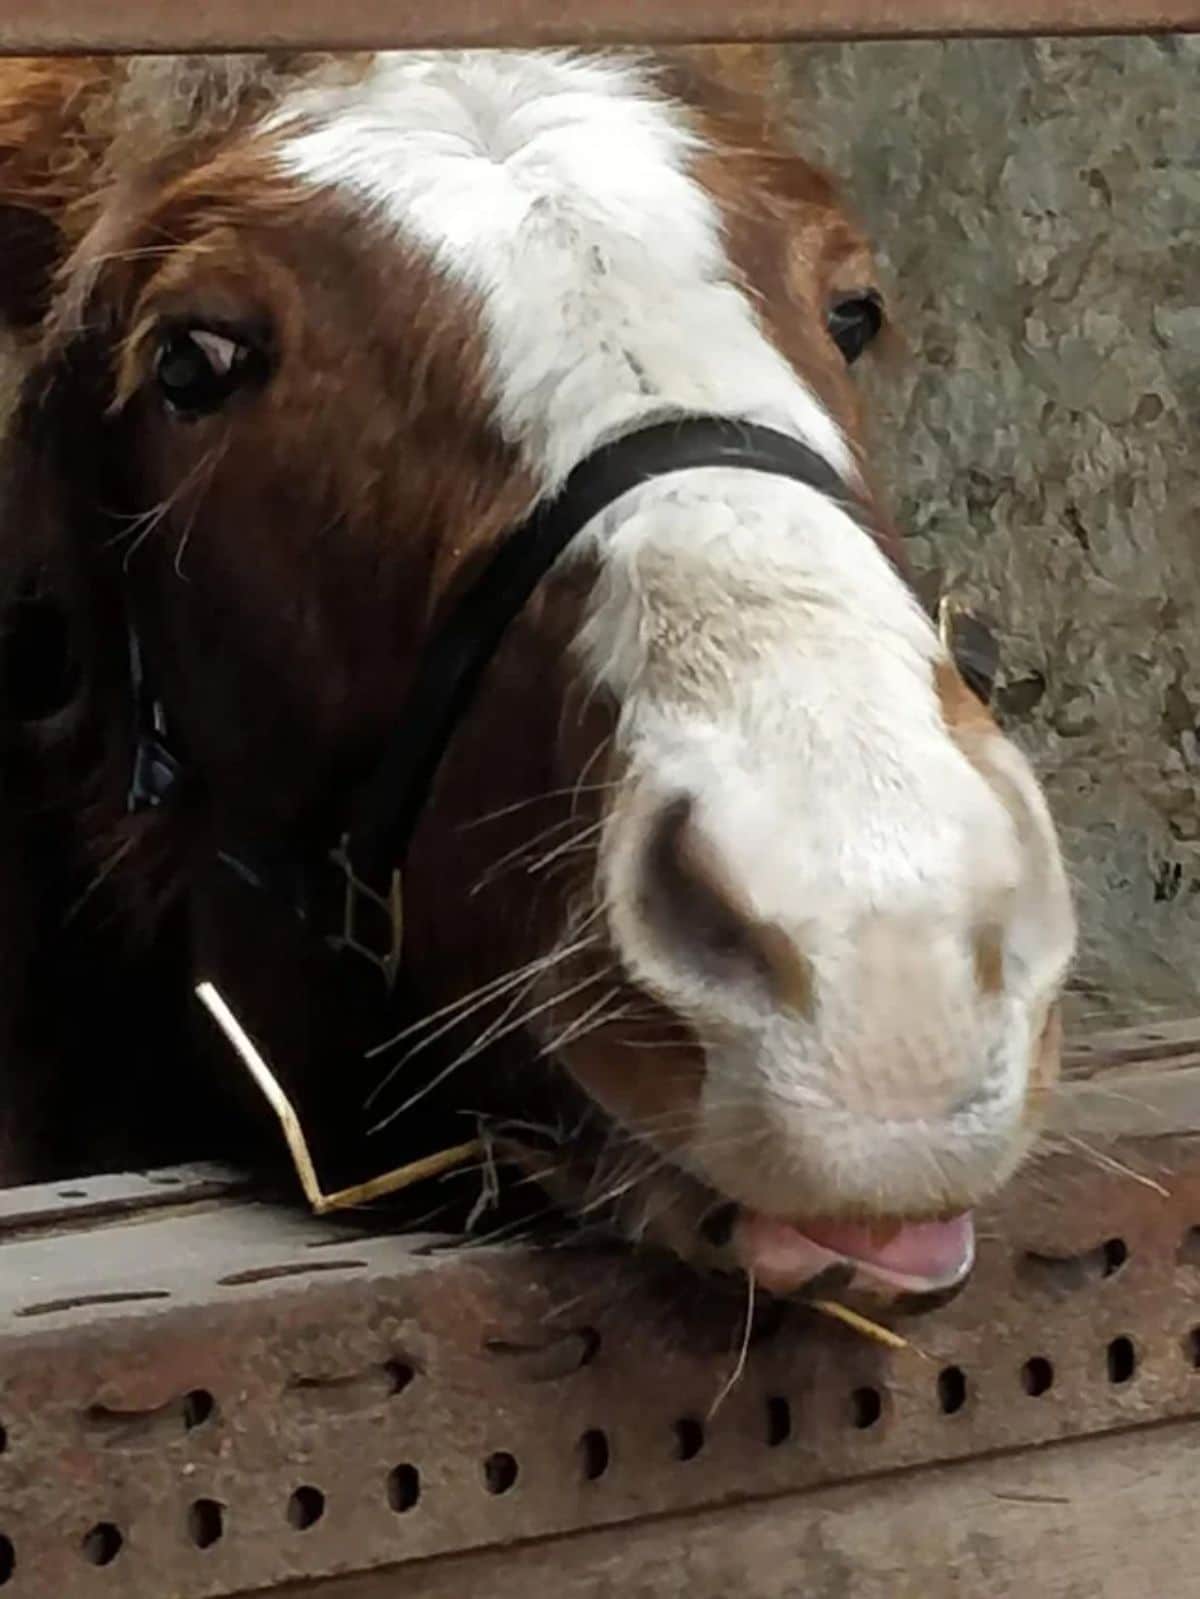 brown and white horse resting the chin on a wooden plank with the tongue sticking out